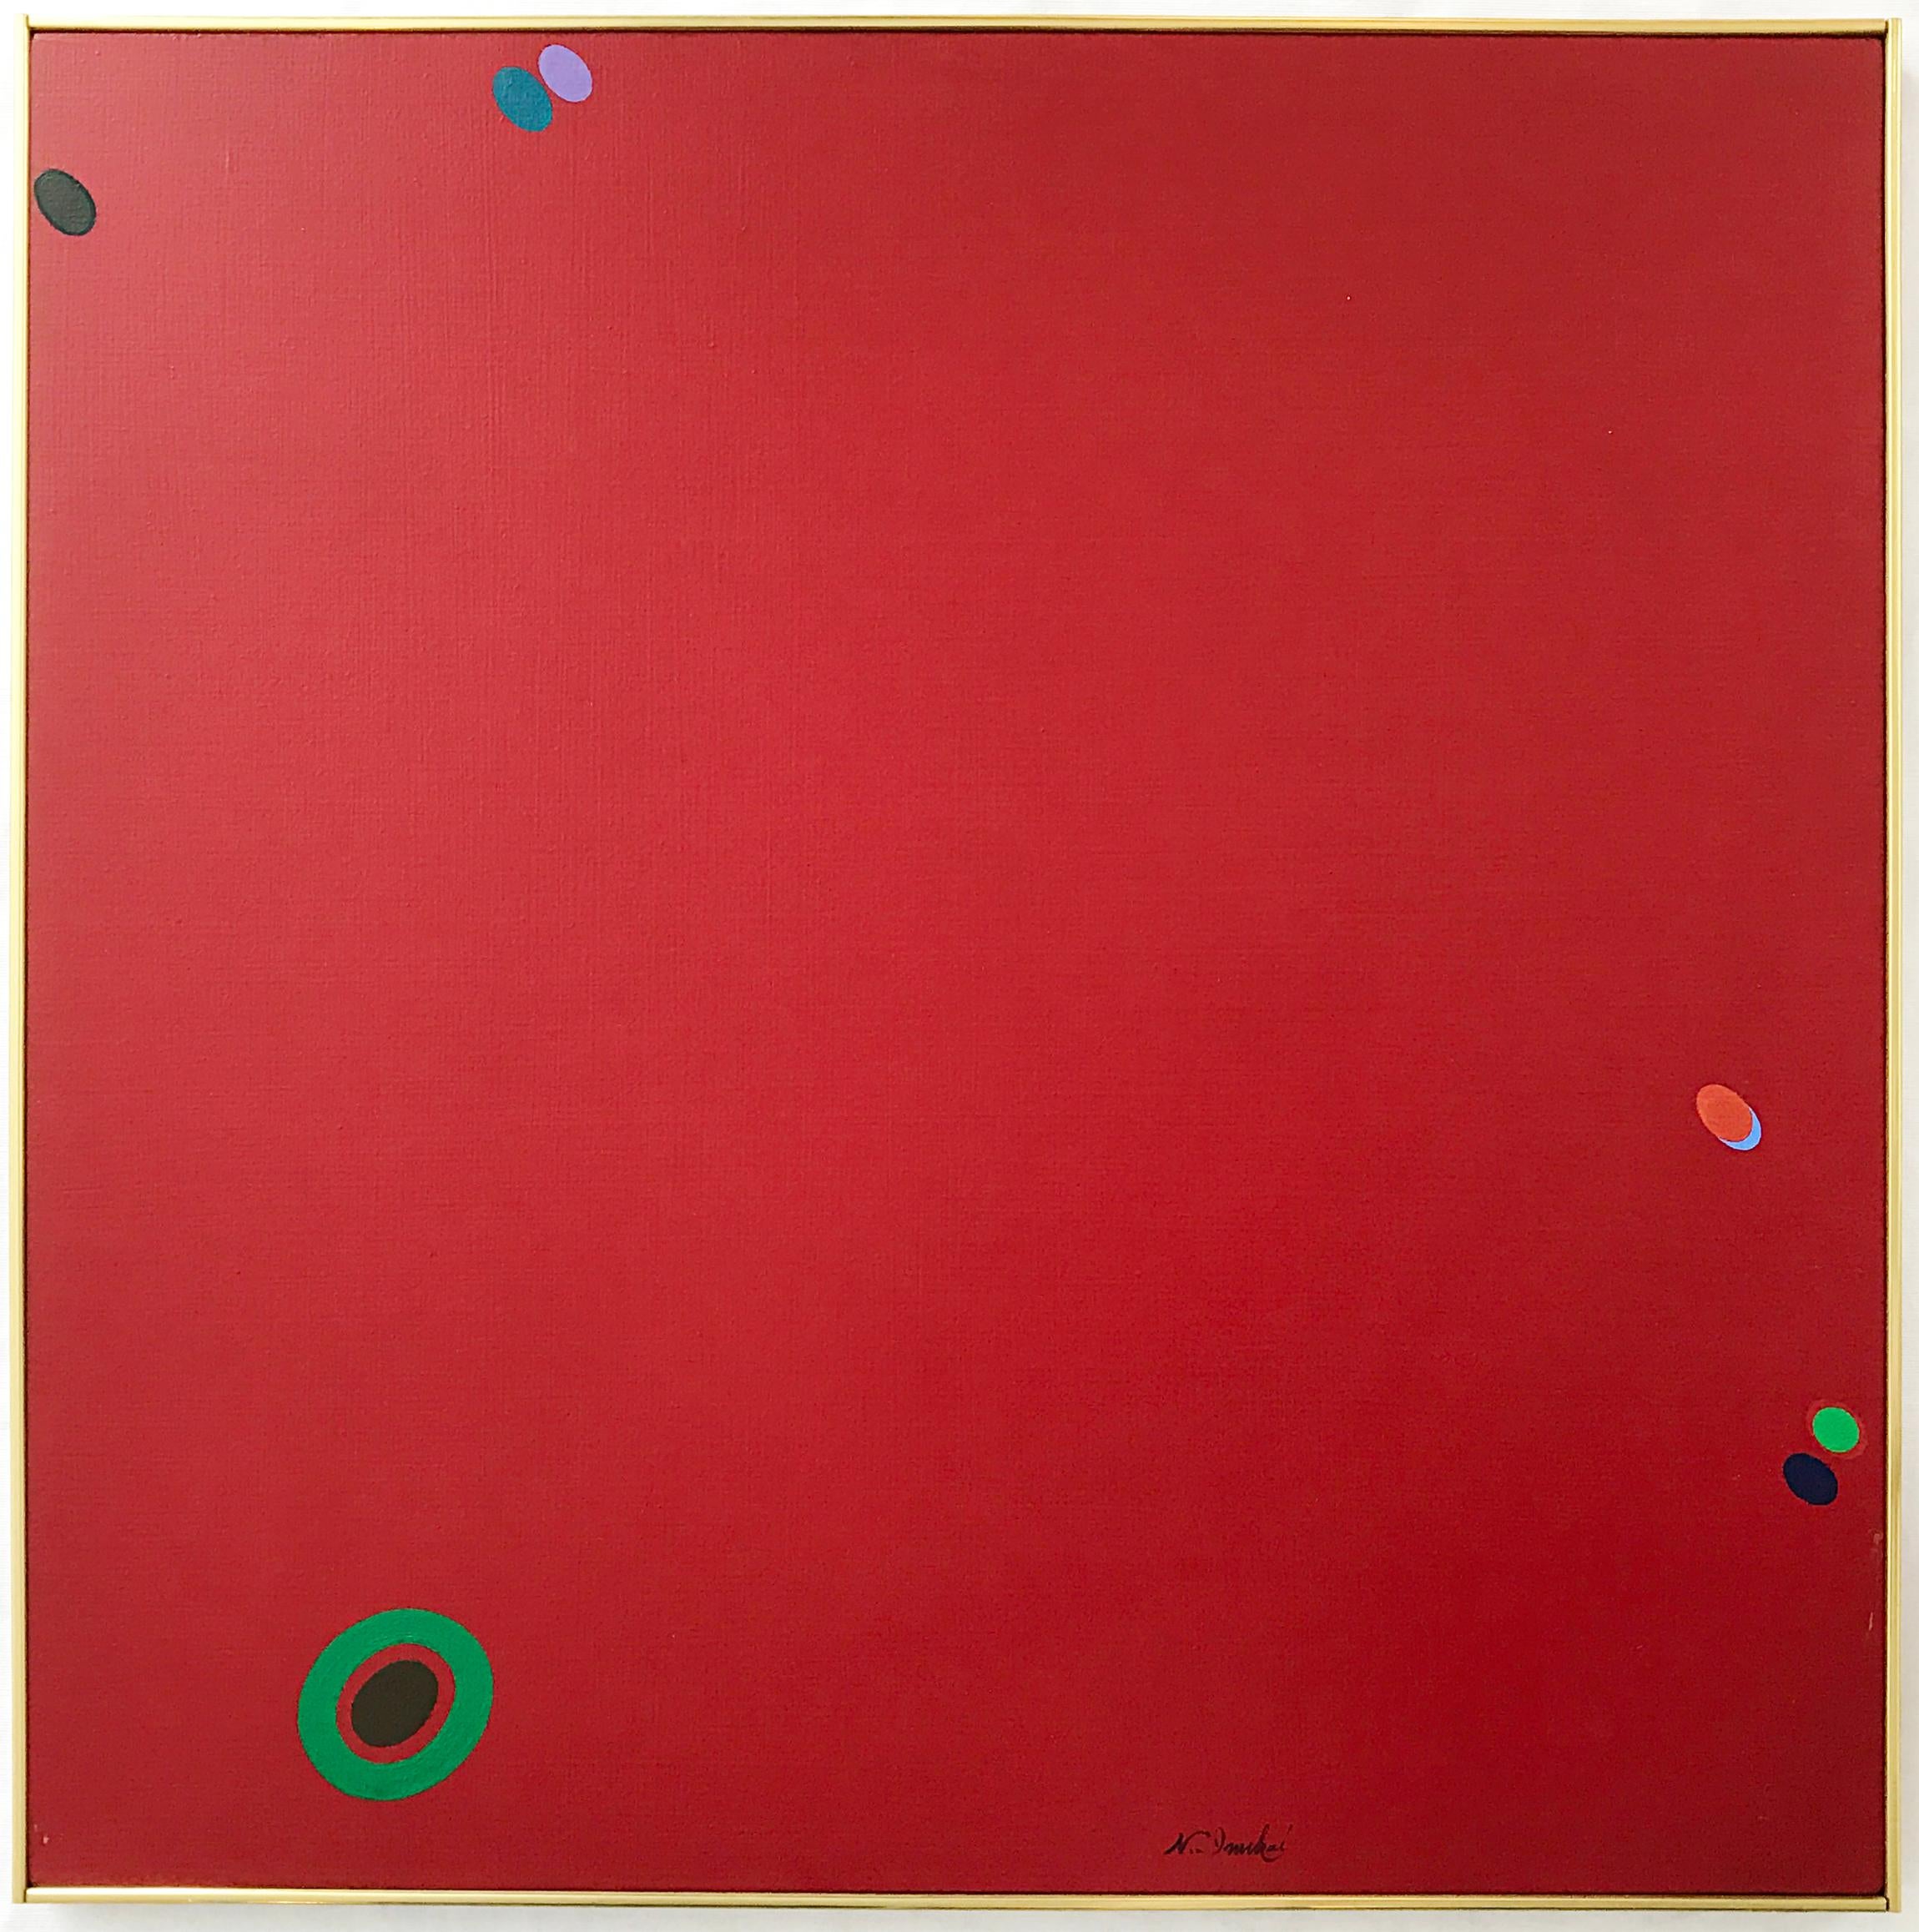 Untitled Red with Floating Dots painting de Naohiko Inukai